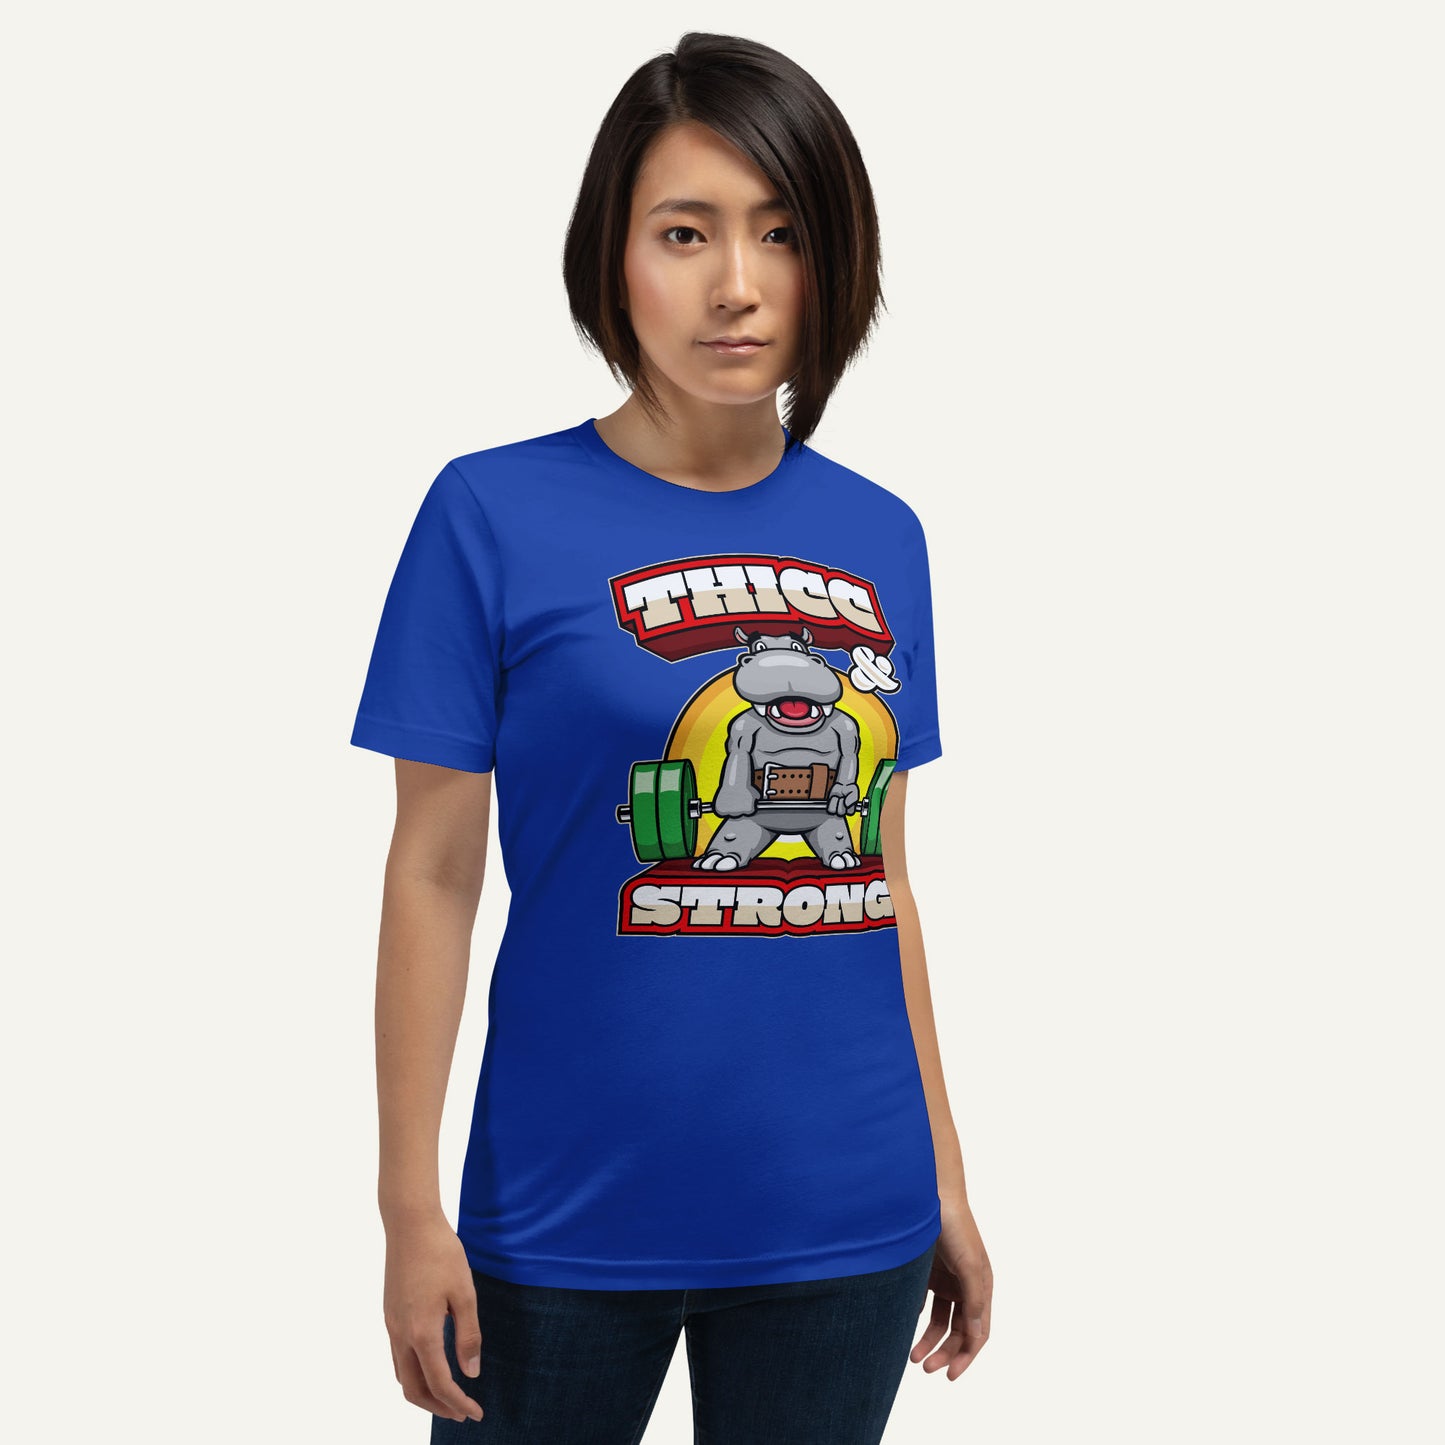 Thicc And Strong Men’s Standard T-Shirt